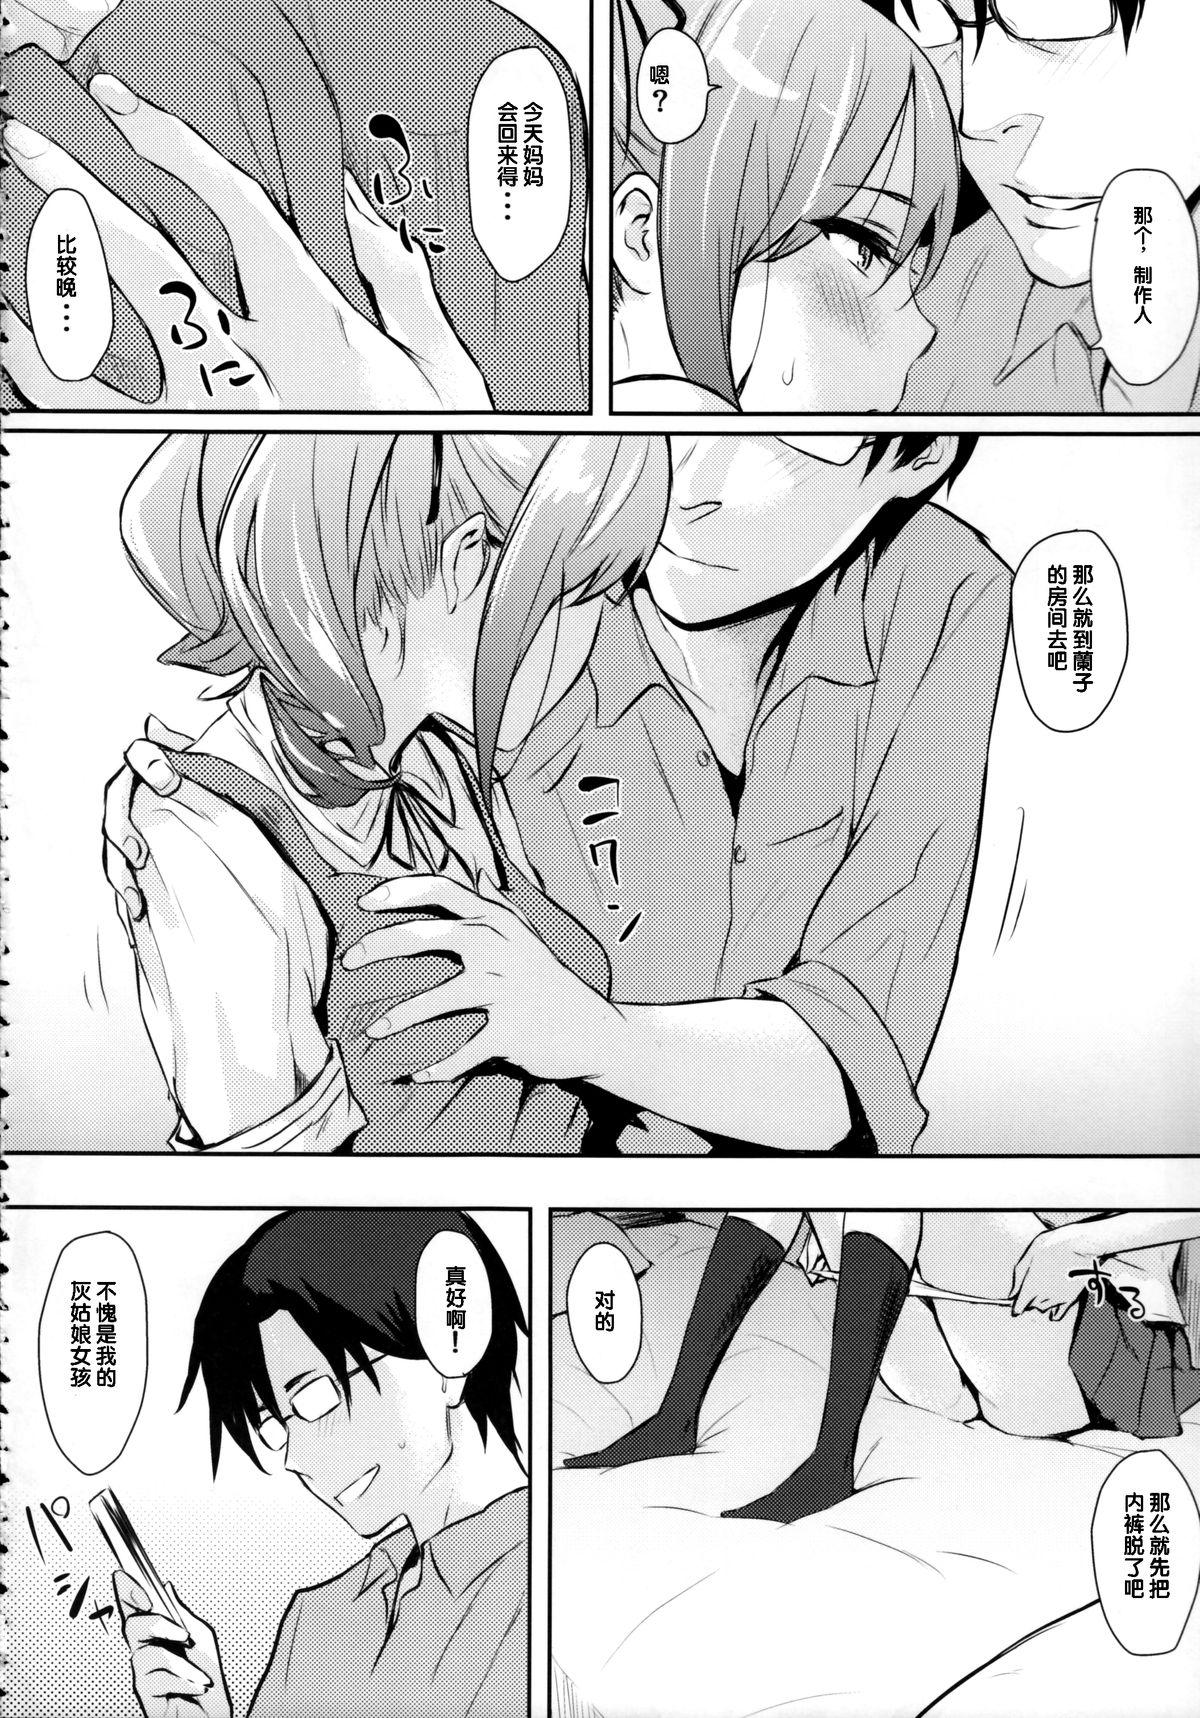 Sesso Ranko-ppoi no! 2 - The idolmaster Amateur - Page 6